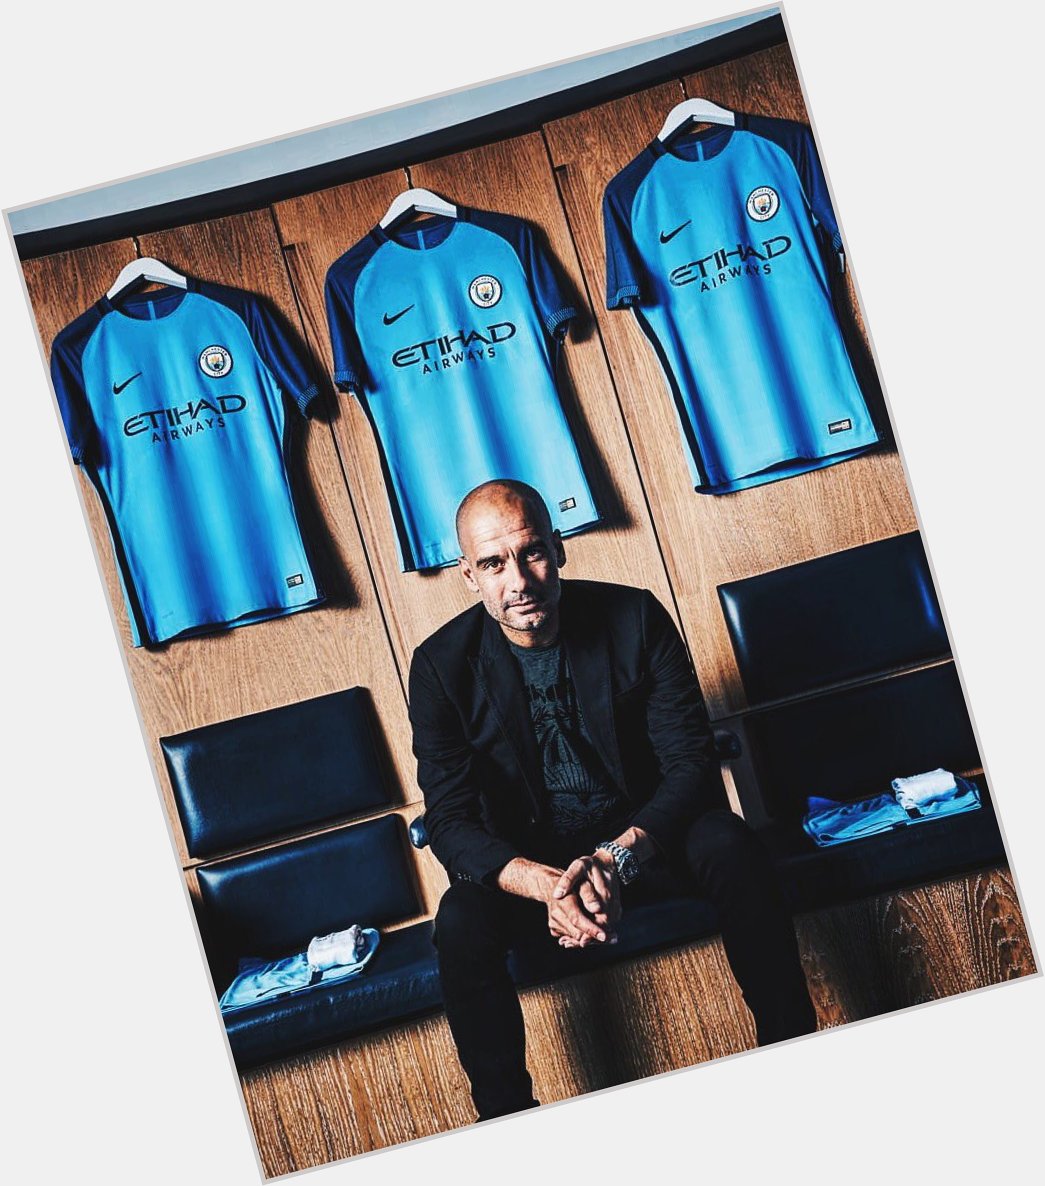 Happy birthday to Pep Guardiola.

Managerial record:
478 matches 344 wins 71.97% win ratio  20 trophies 